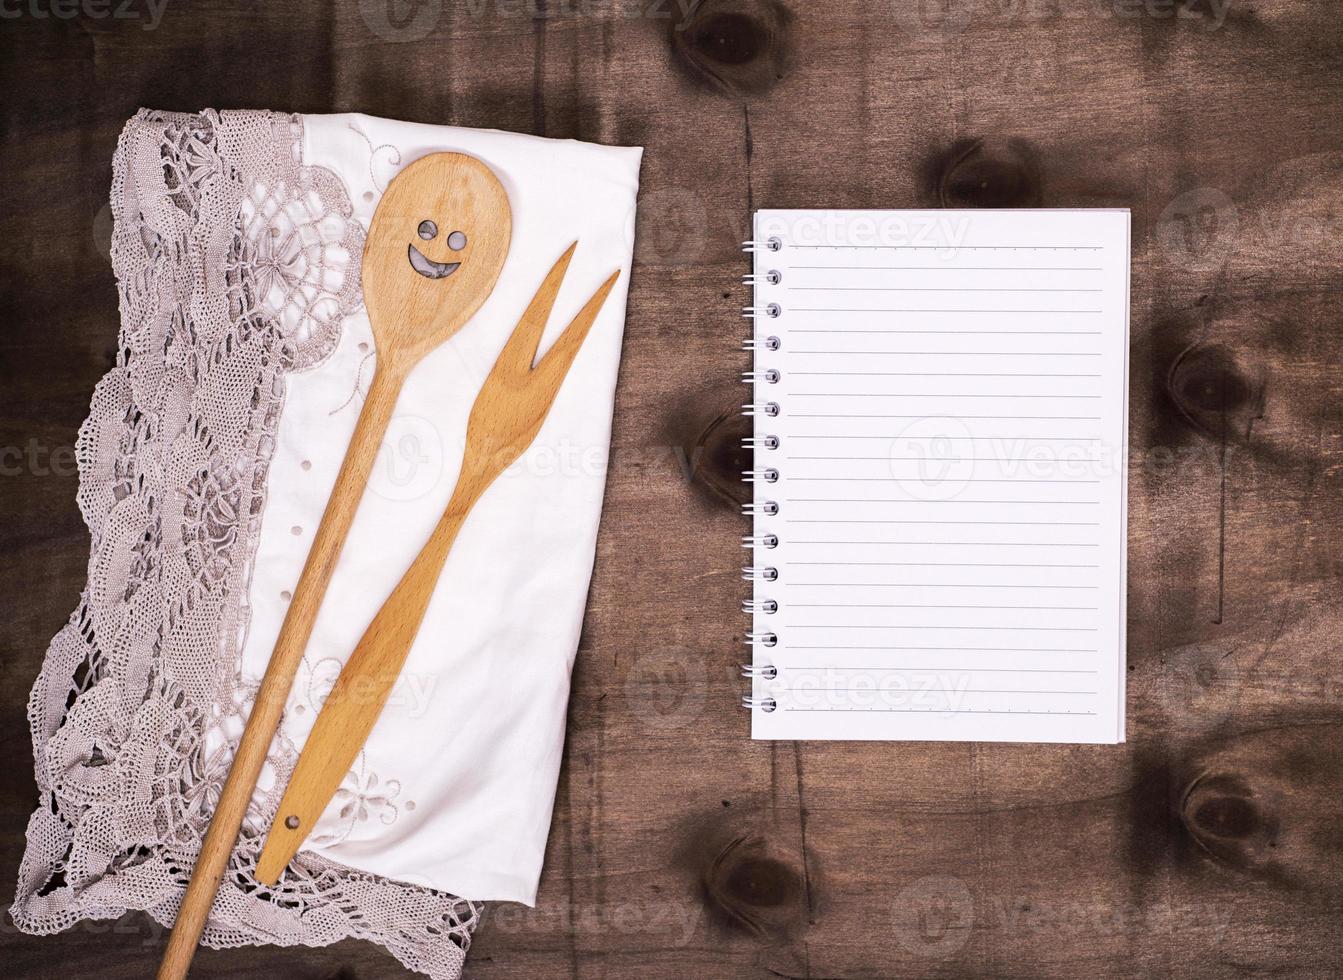 https://static.vecteezy.com/system/resources/previews/018/961/900/non_2x/open-notepad-in-a-line-and-a-wooden-spoon-with-a-fork-photo.jpg